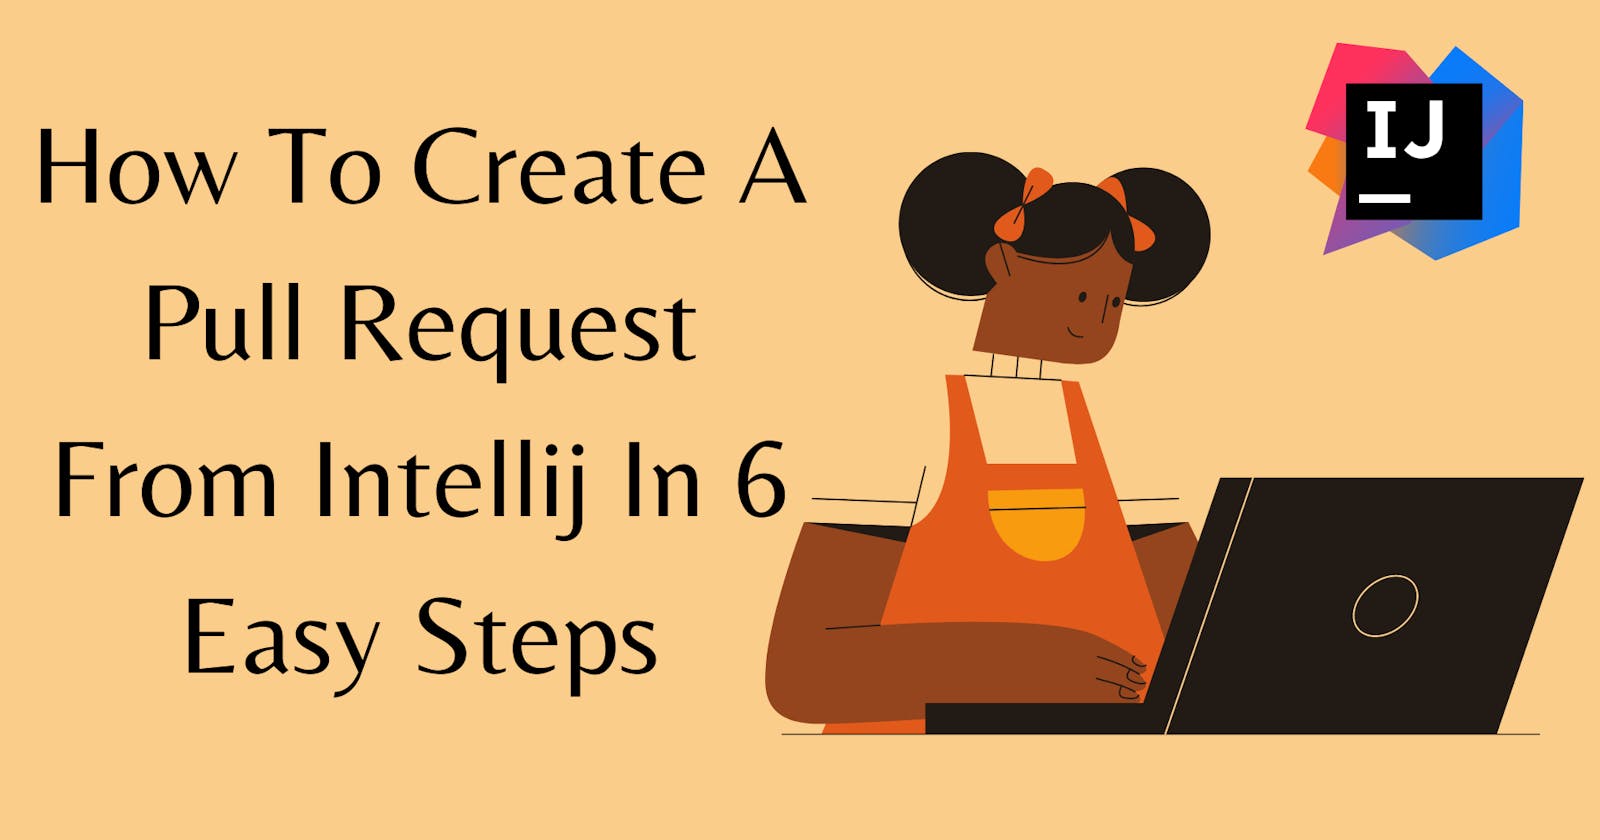 How To Create A Pull Request From Intellij In 6 Easy Steps